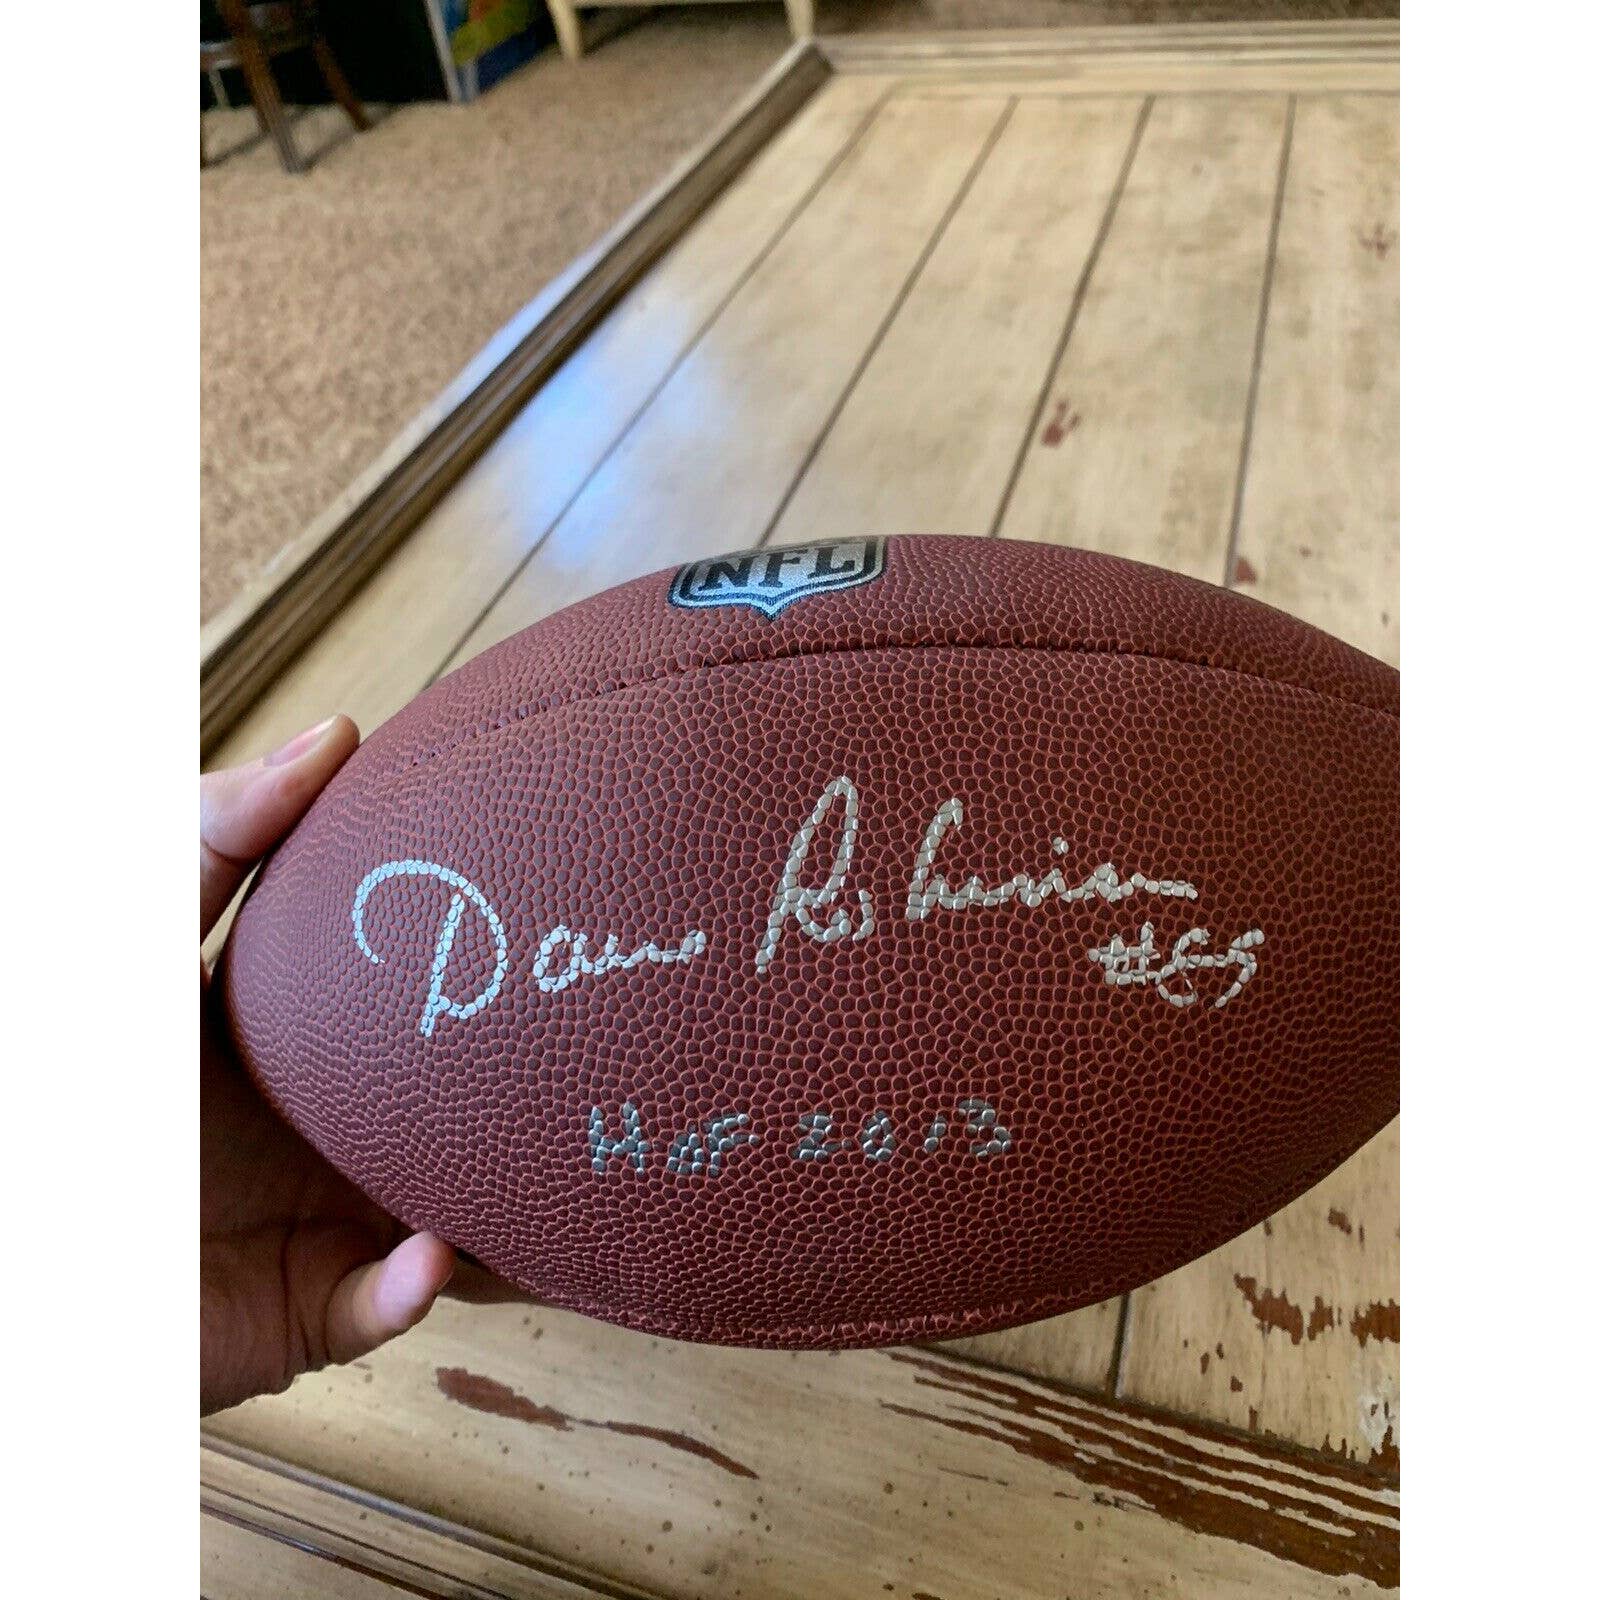 Dave Robinson Autographed/Signed Football Schwartz COA Green Bay Packers - TreasuresEvolved